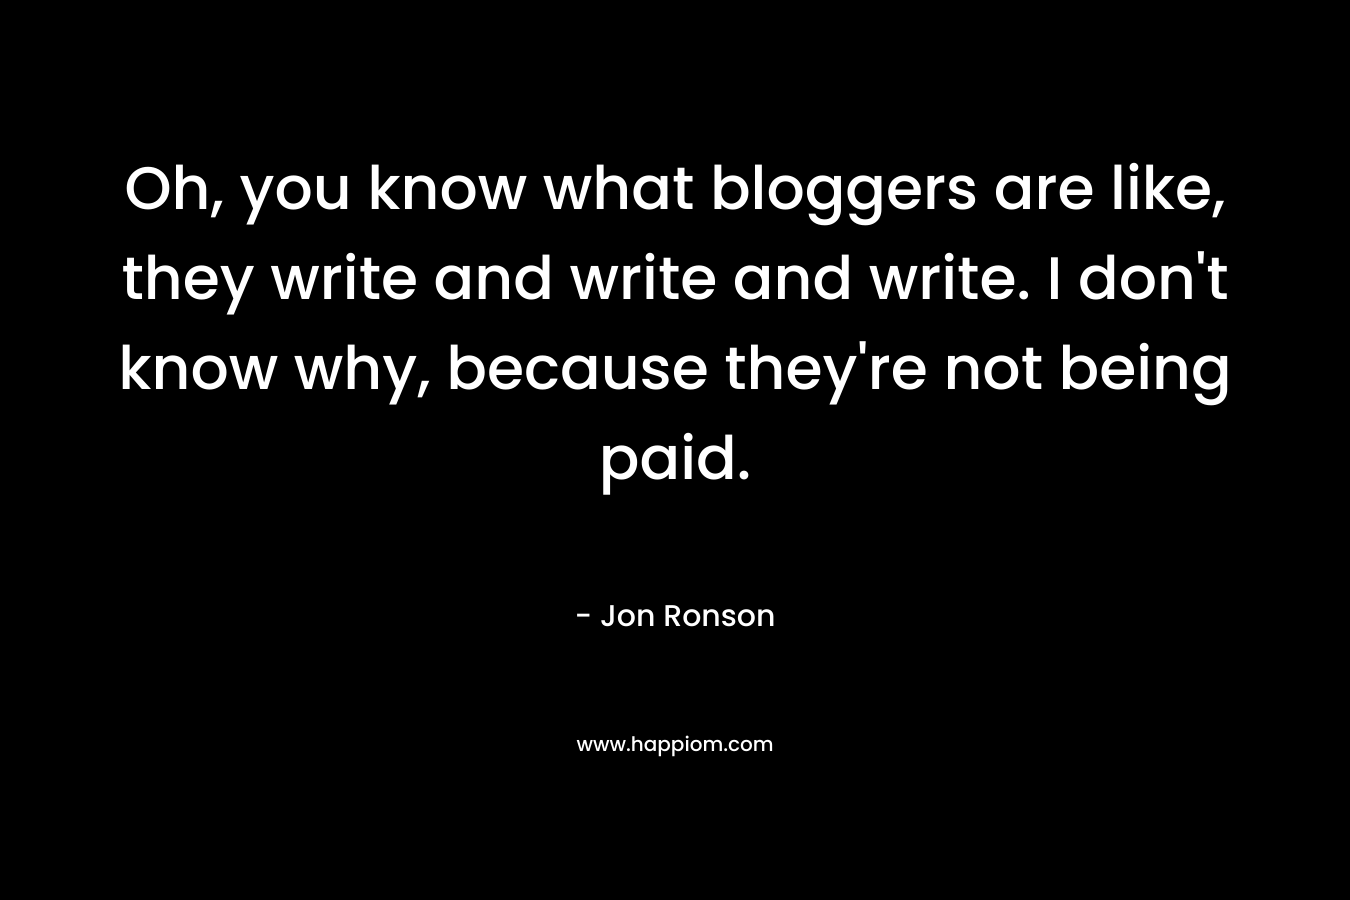 Oh, you know what bloggers are like, they write and write and write. I don't know why, because they're not being paid.